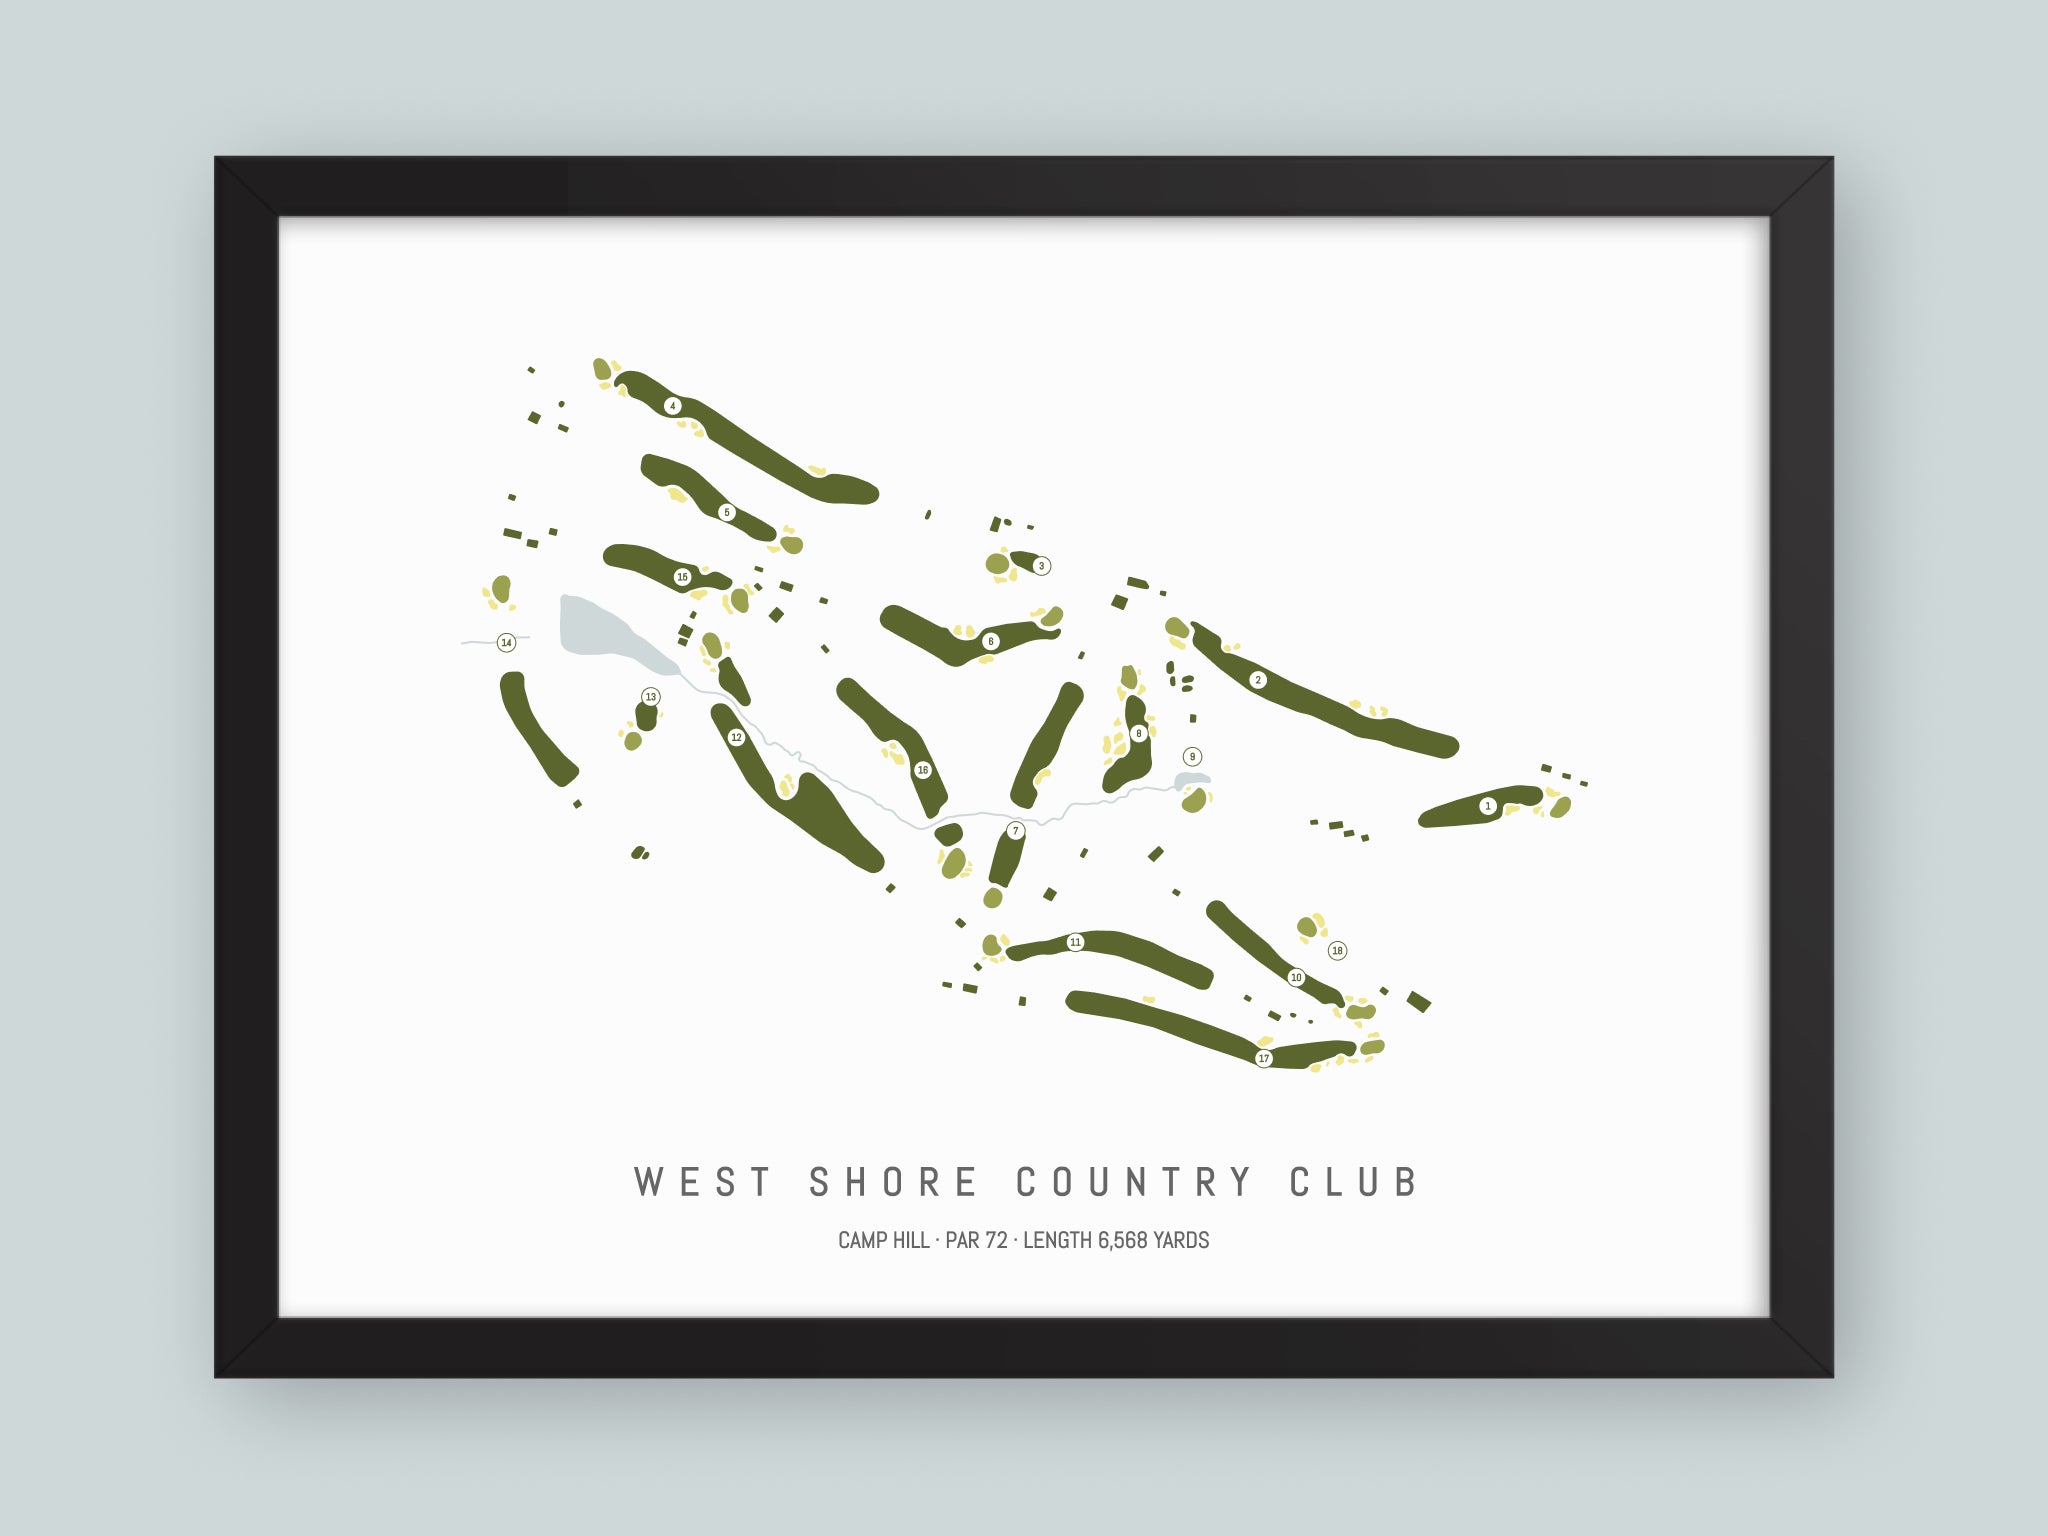 West-Shore-Country-Club-PA--Black-Frame-24x18-With-Hole-Numbers